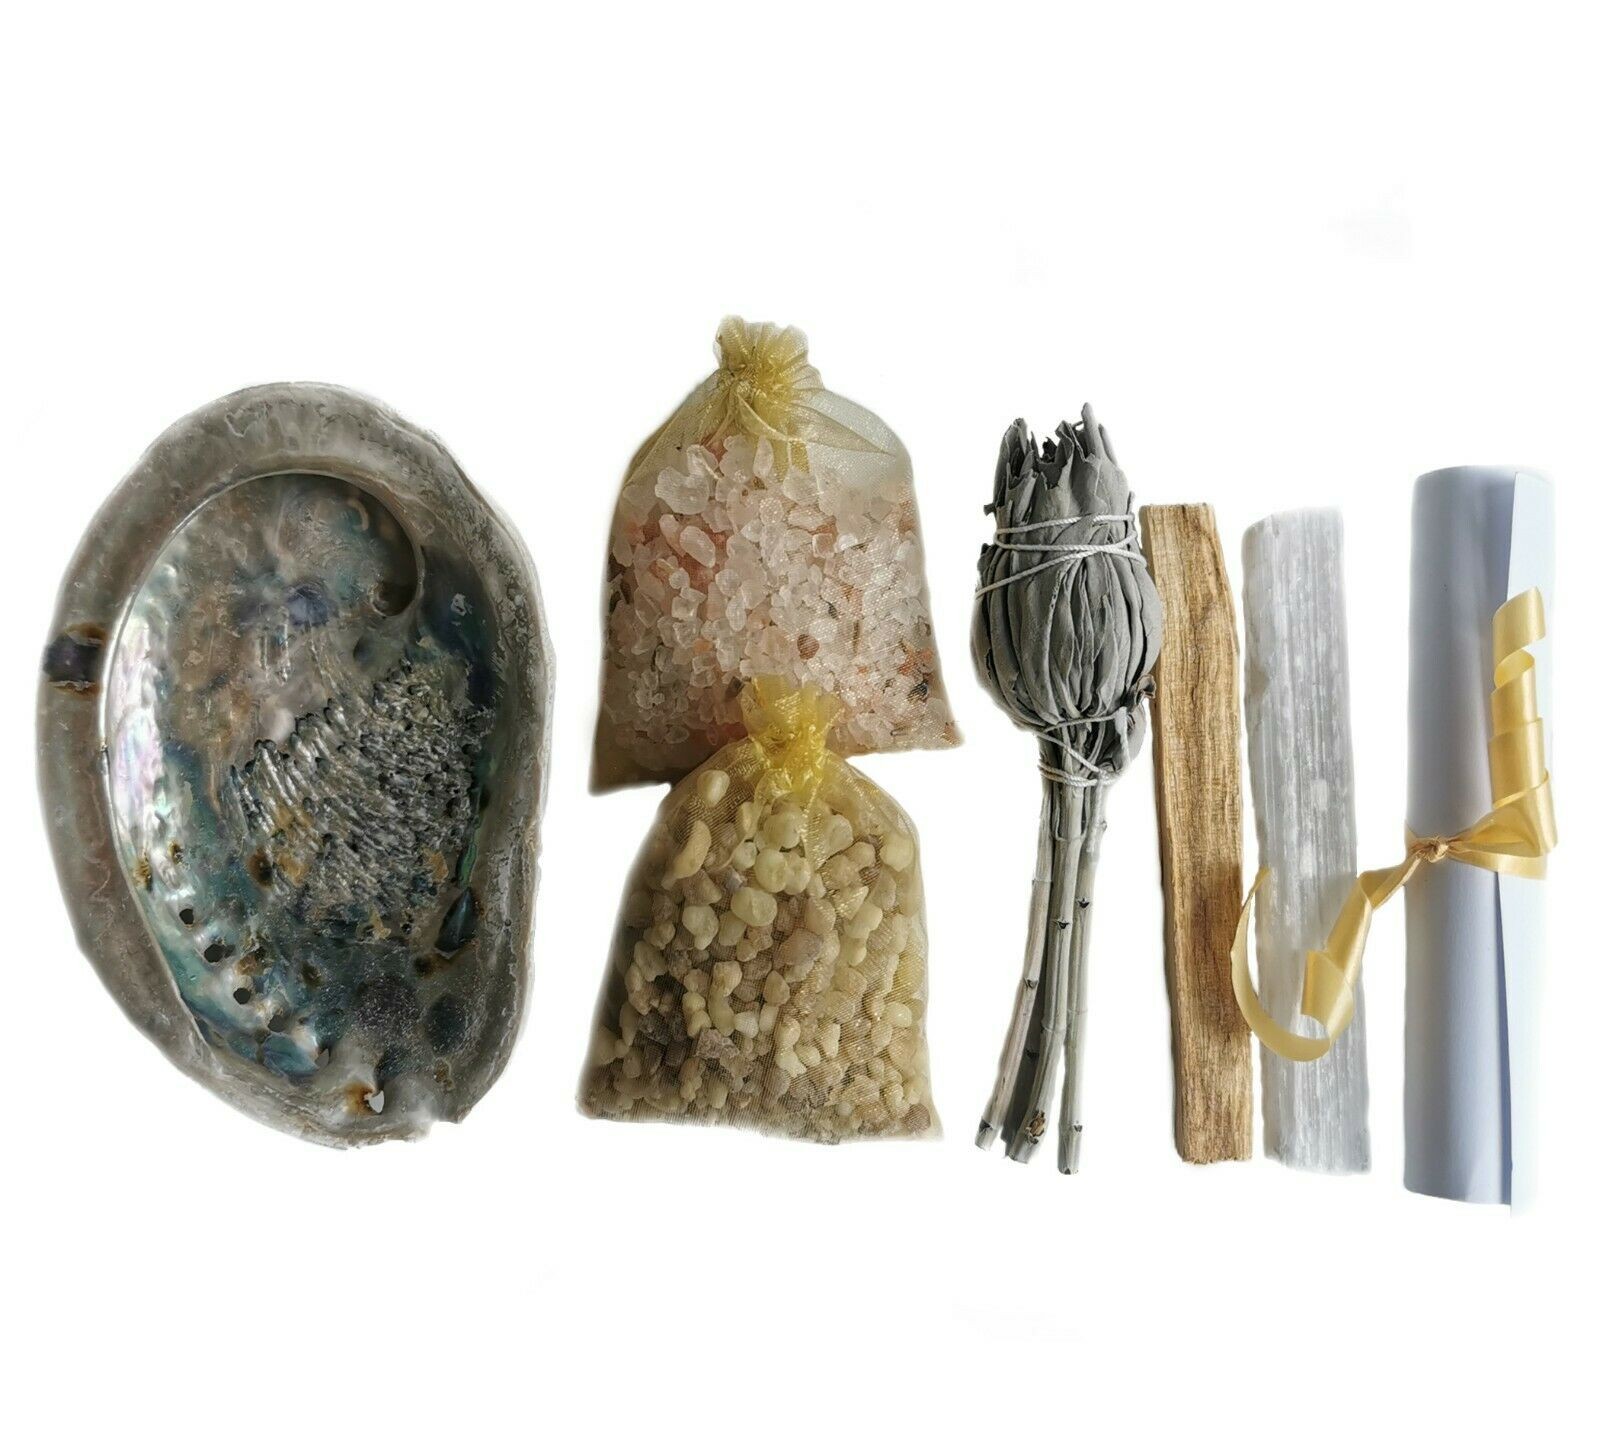 House Clearing Incense Resin Set